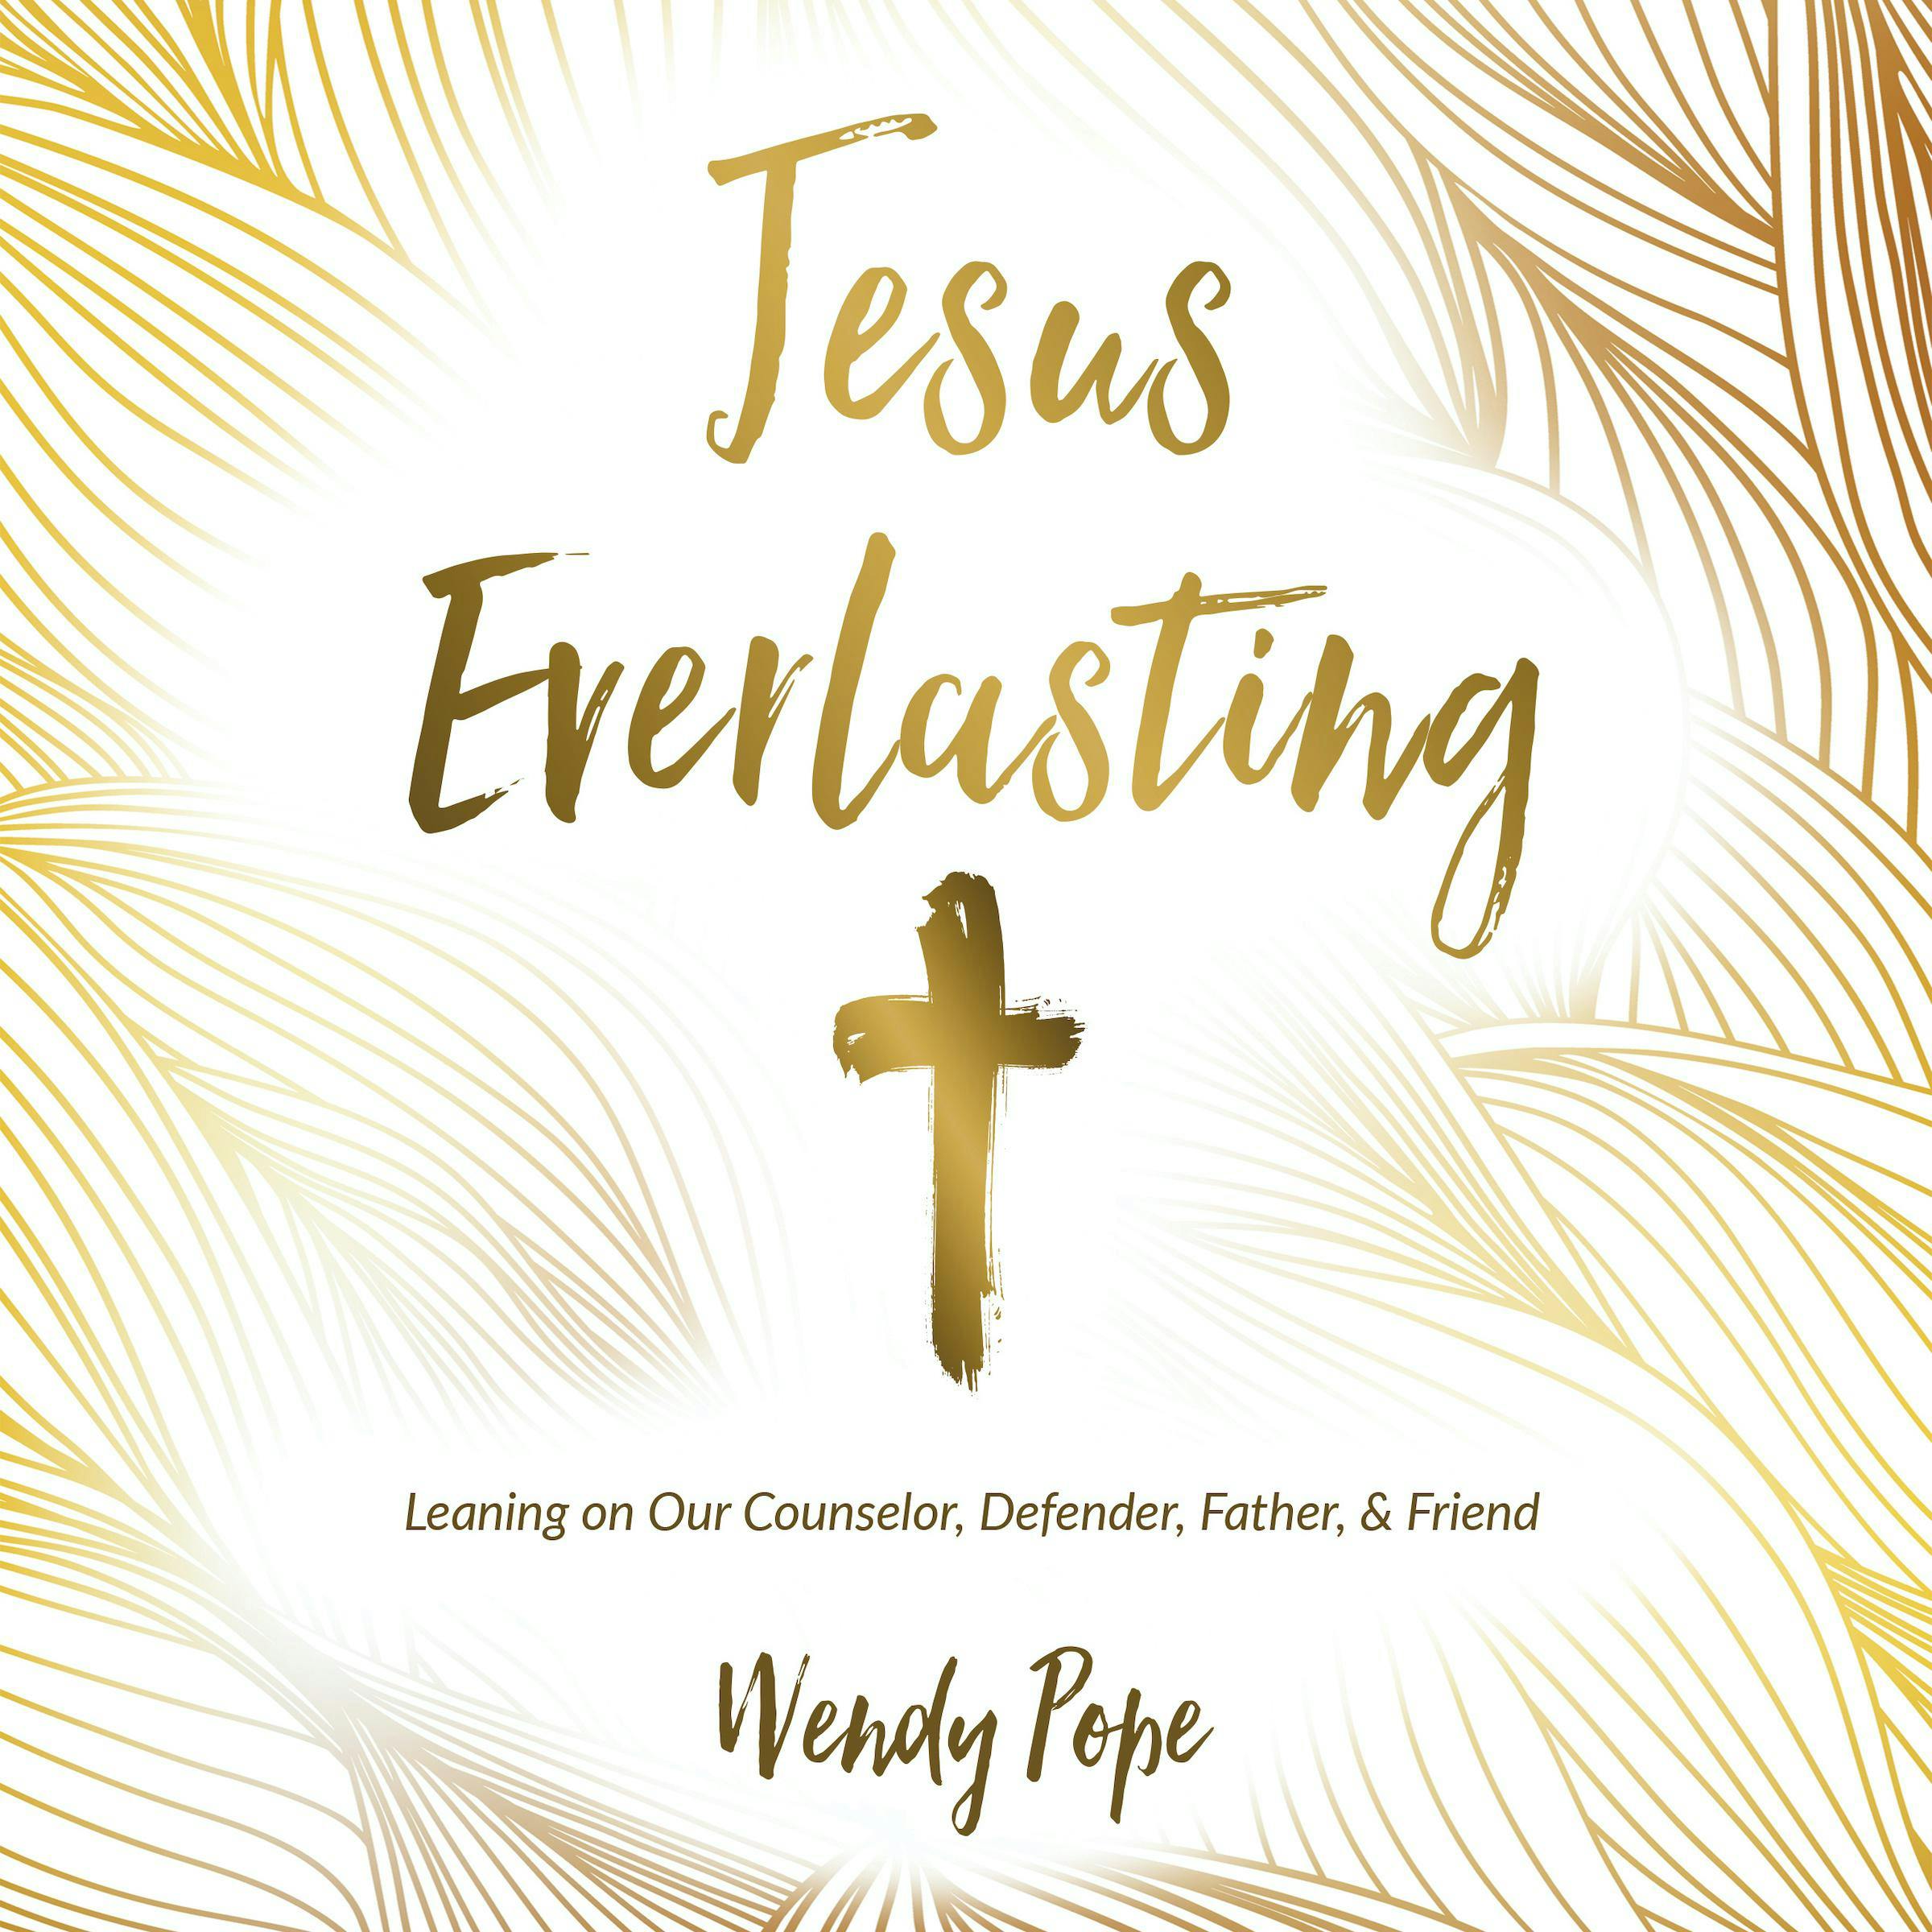 Jesus Everlasting: Leaning on Our Counselor, Defender, Father, and Friend - undefined